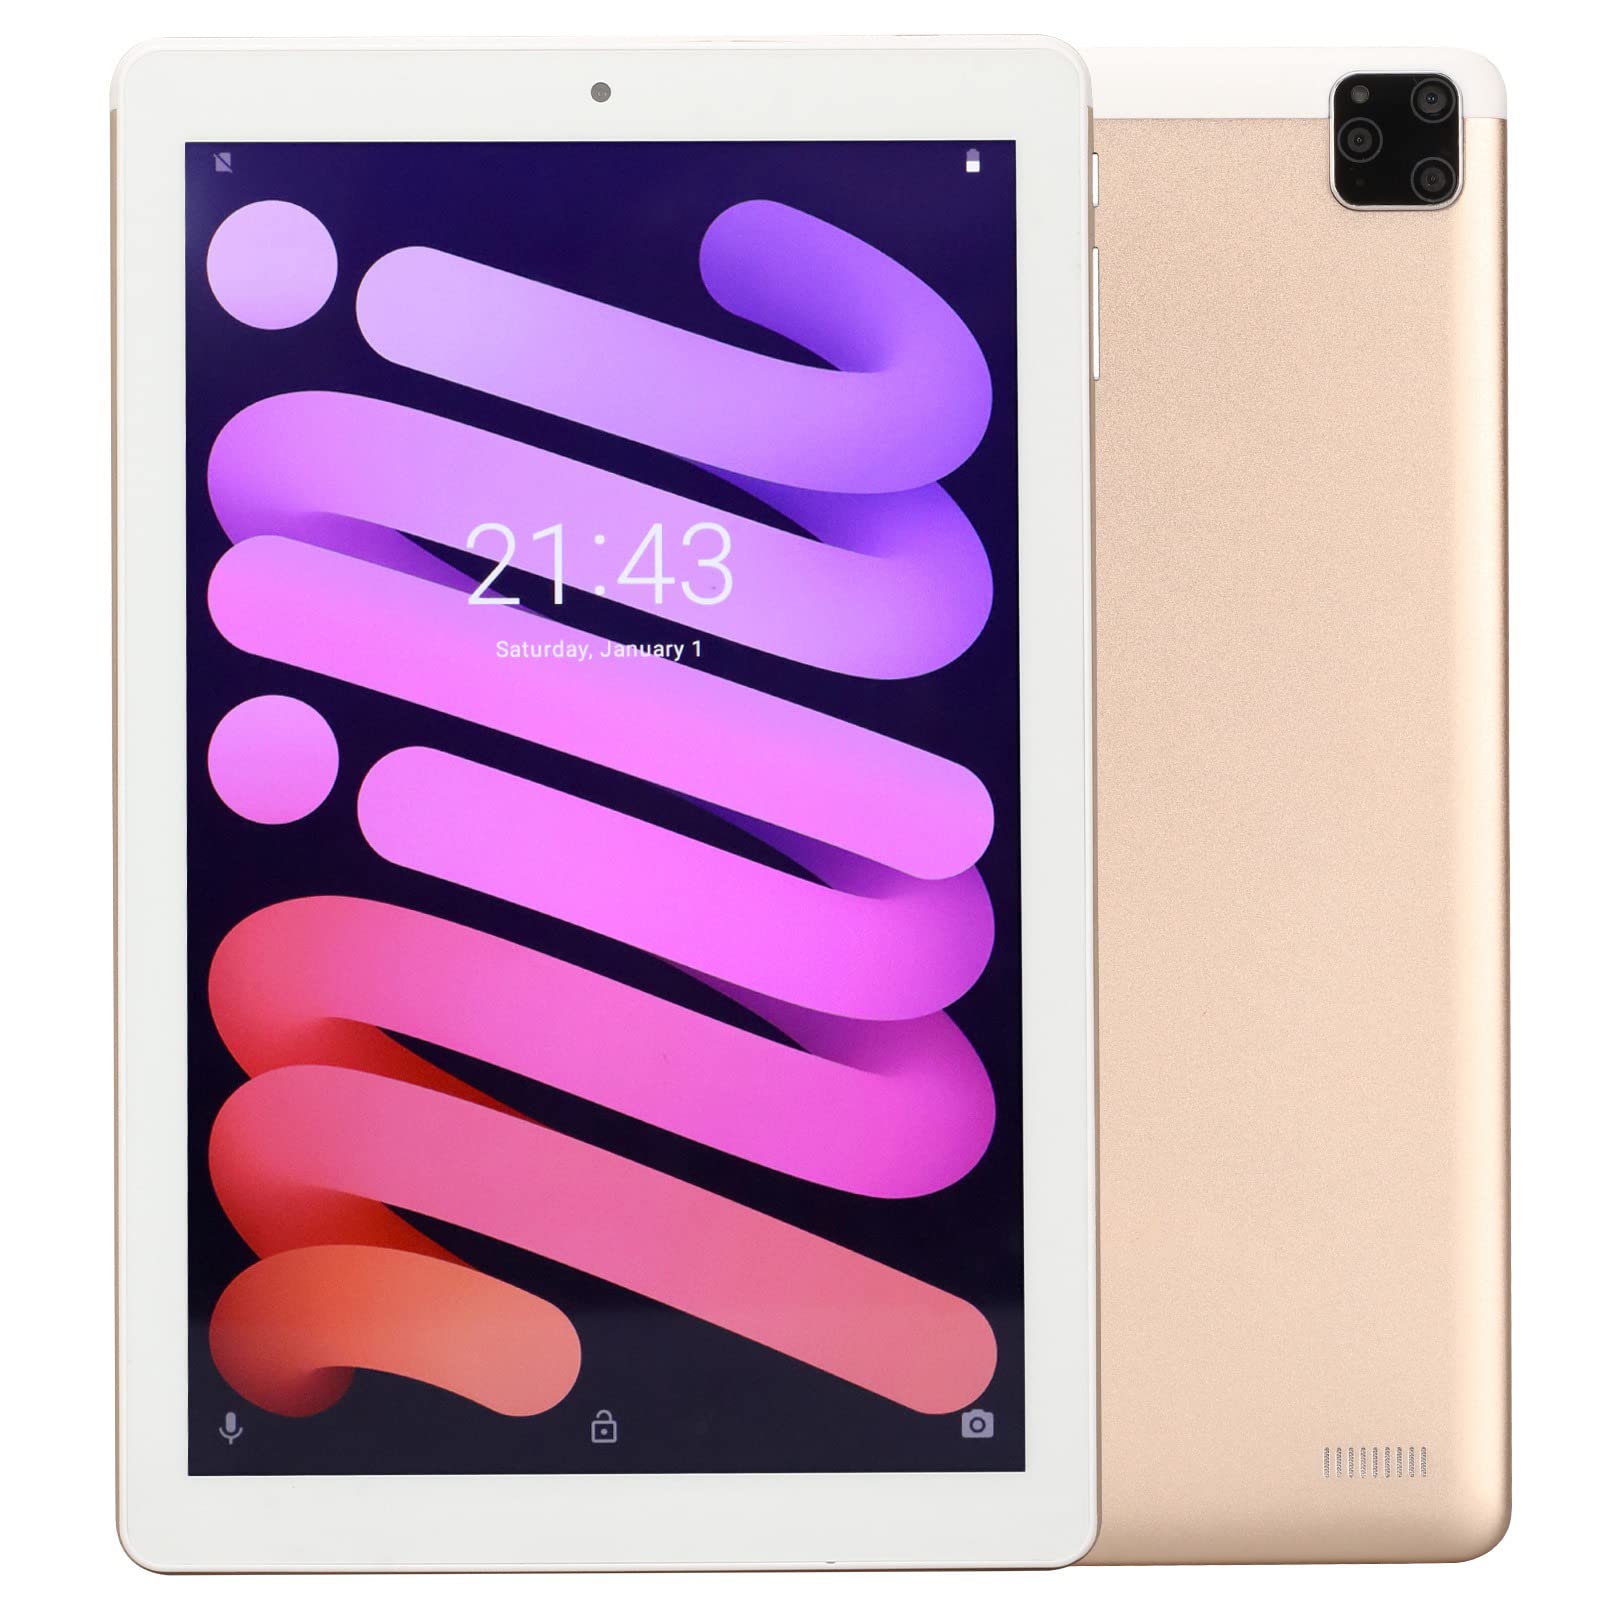 Zyyini 10 Inch Tablet for Android 11, Gold Portable 10 Inch Tablet for Kids,4G RAM 256G ROM,Contains 64G Memory Card,WiFi and 3G Networks,6000mAh Large Capacity Battery,Face Unlocking